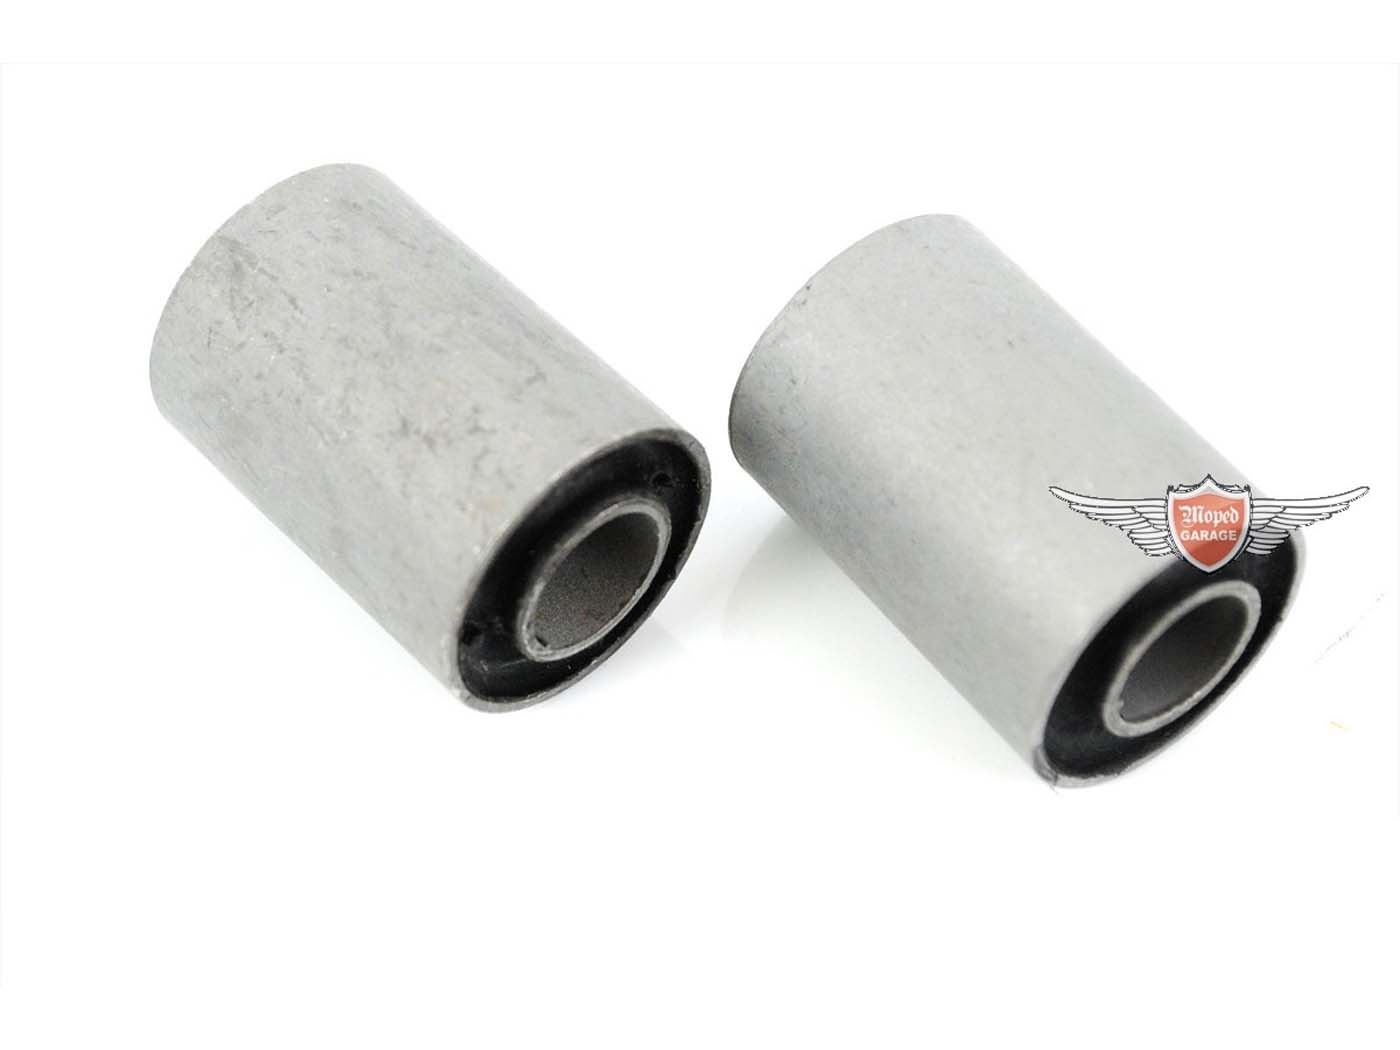 Swingarm Bearing 2 23 X 10mm Wide Approx. 35mm For Honda MB MT 50, Dax 50 And 70, XL CL CT CB